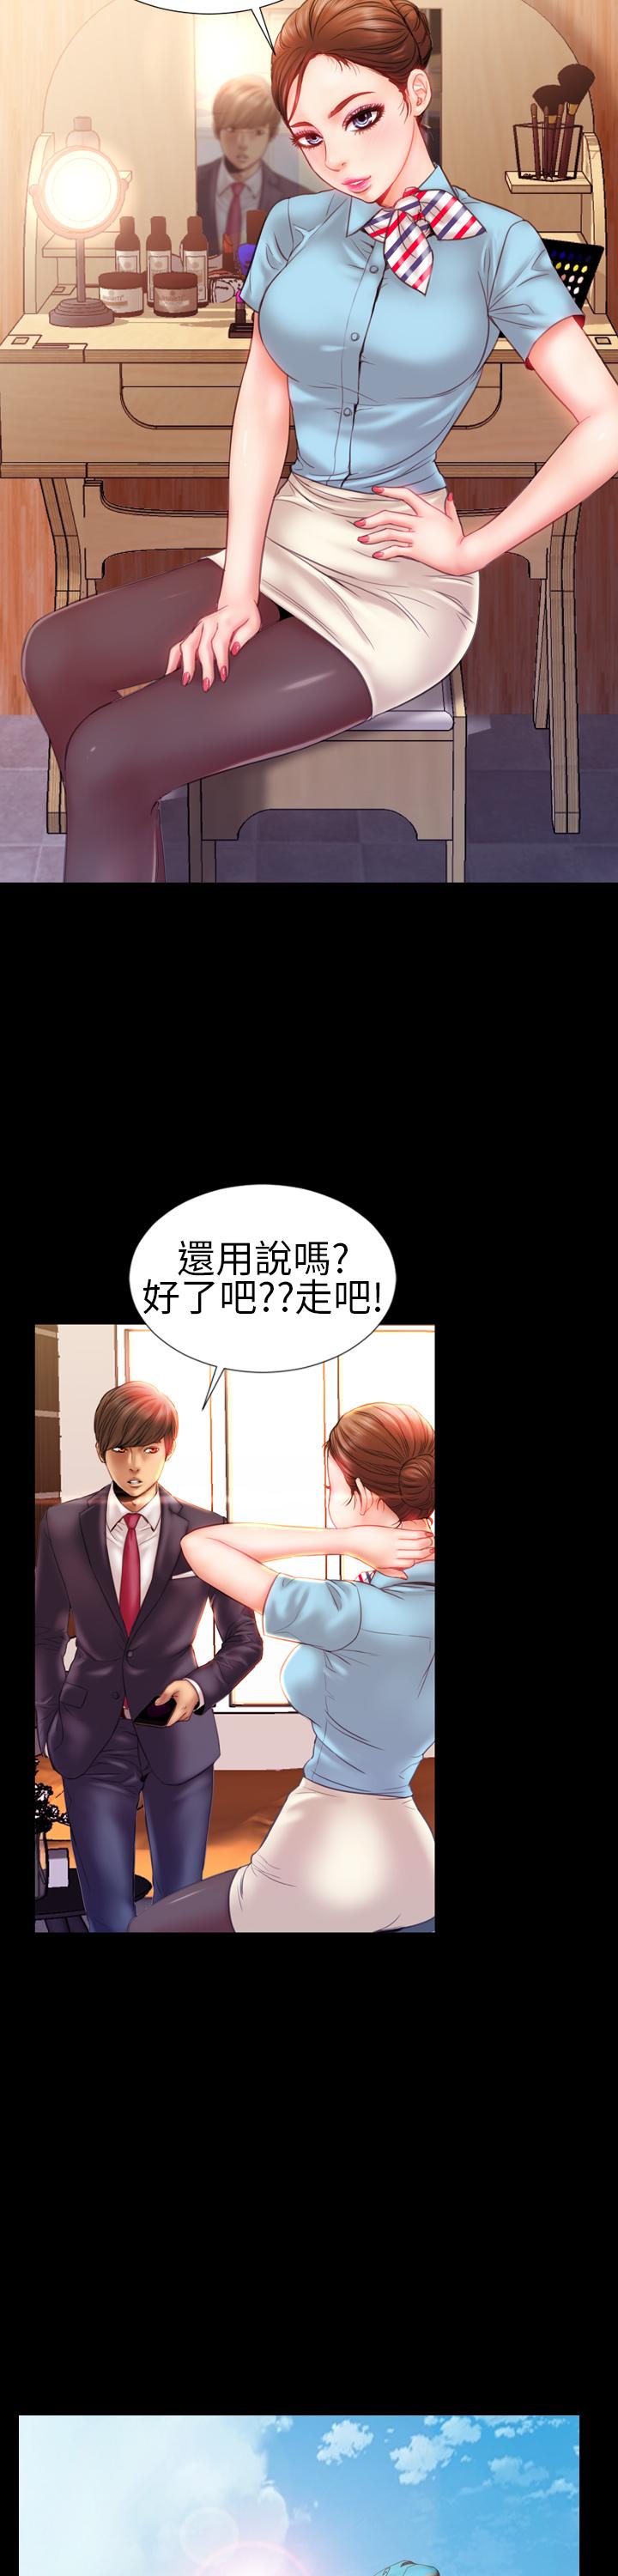 MY WIVES (淫蕩的妻子們) Ch.1 (Chinese) 13